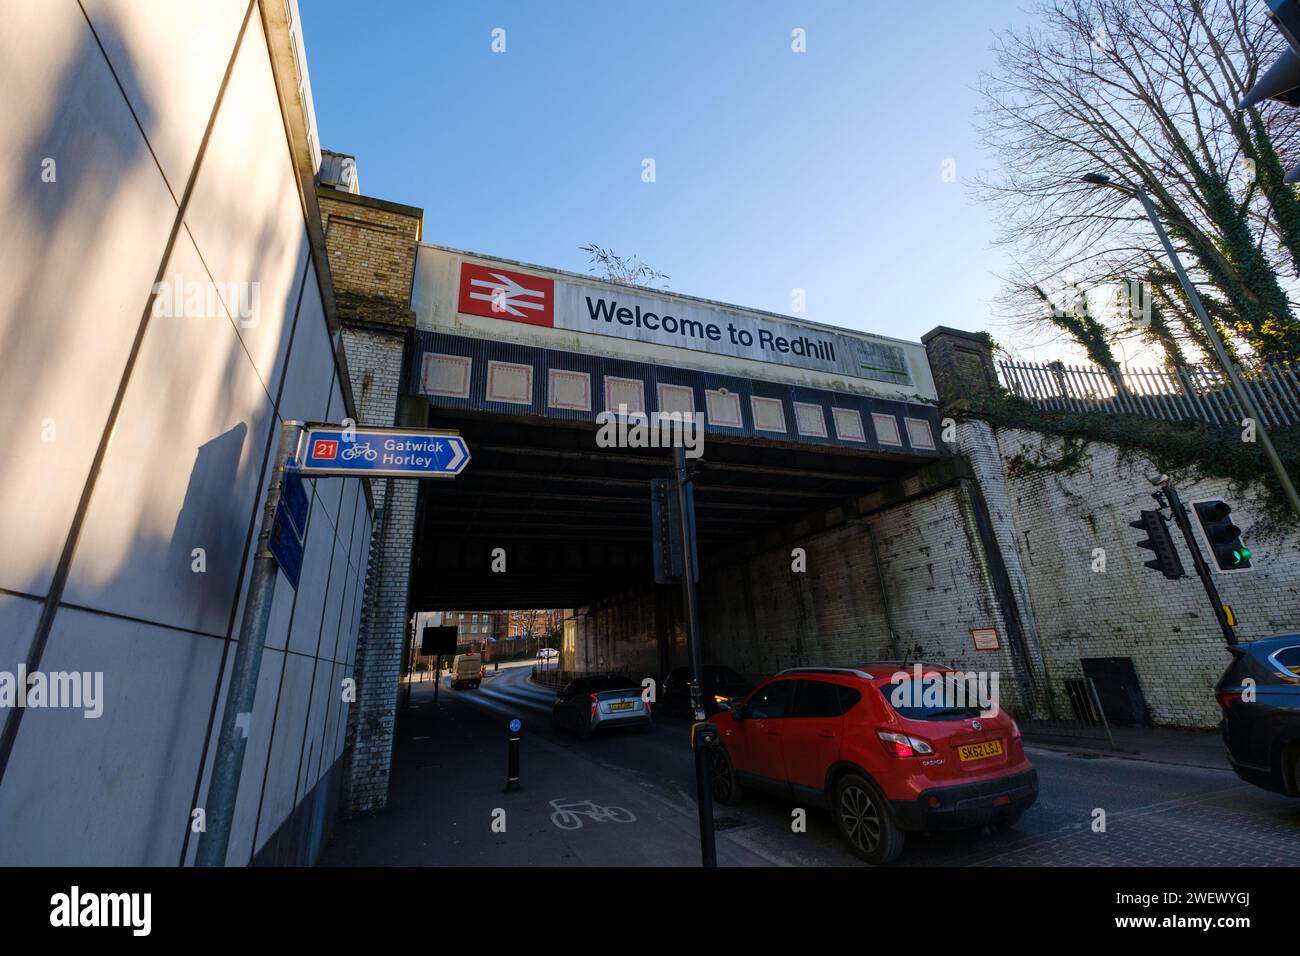 The railway bridge next to the train station in Redhill Surrey with Welcome to Redhill sign and British rail logo showing A25 road and cycle routes. Stock Photo